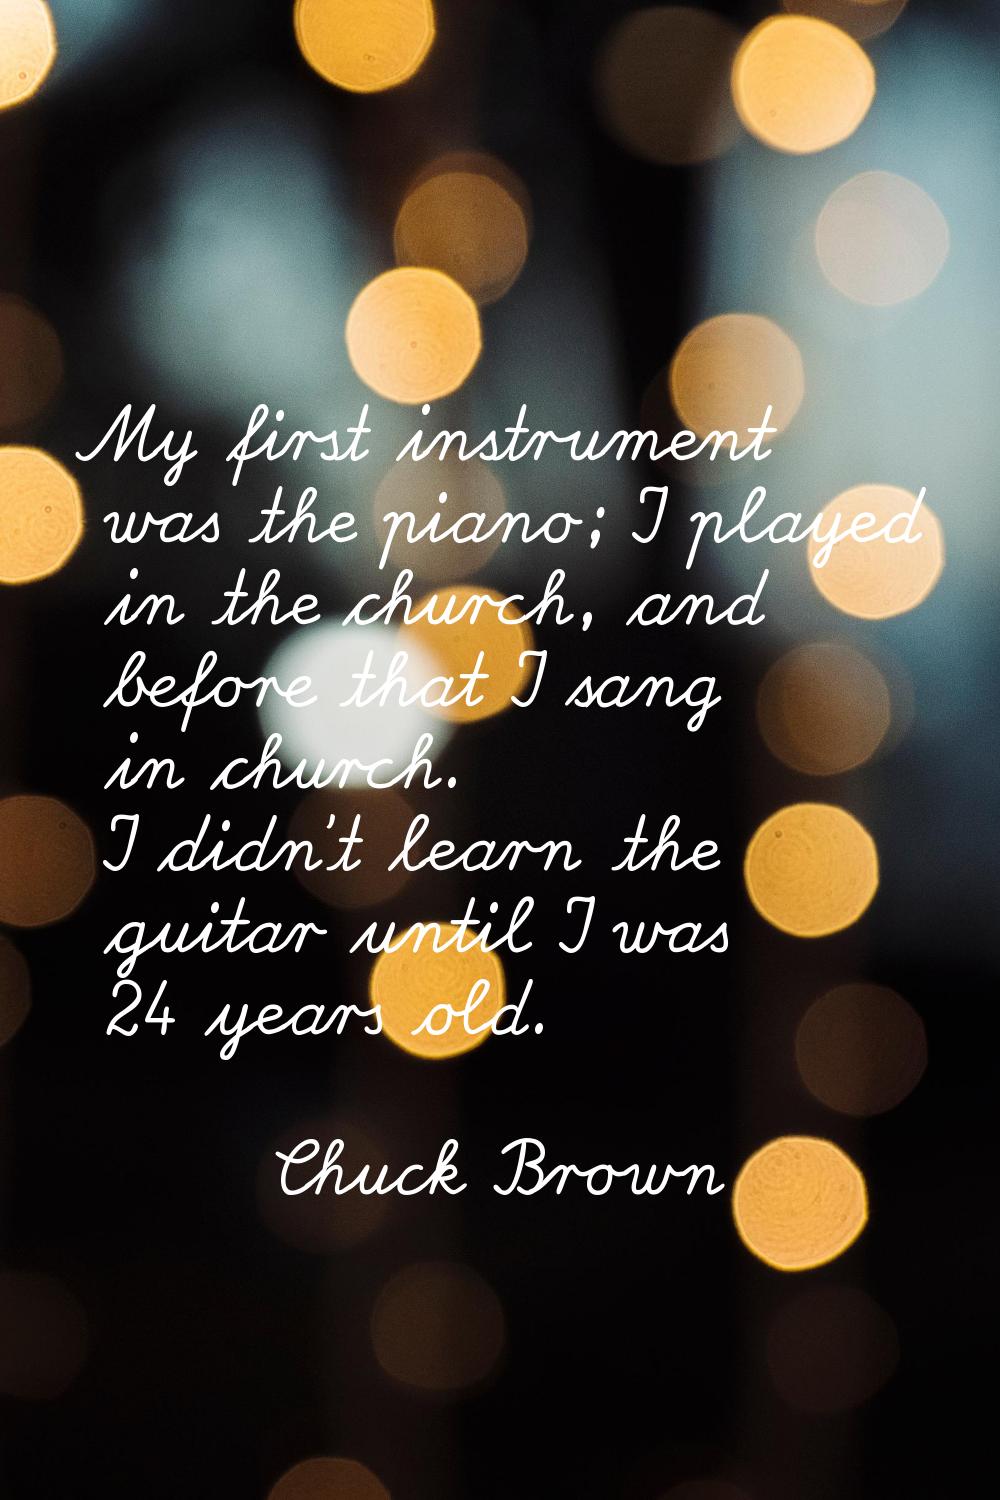 My first instrument was the piano; I played in the church, and before that I sang in church. I didn